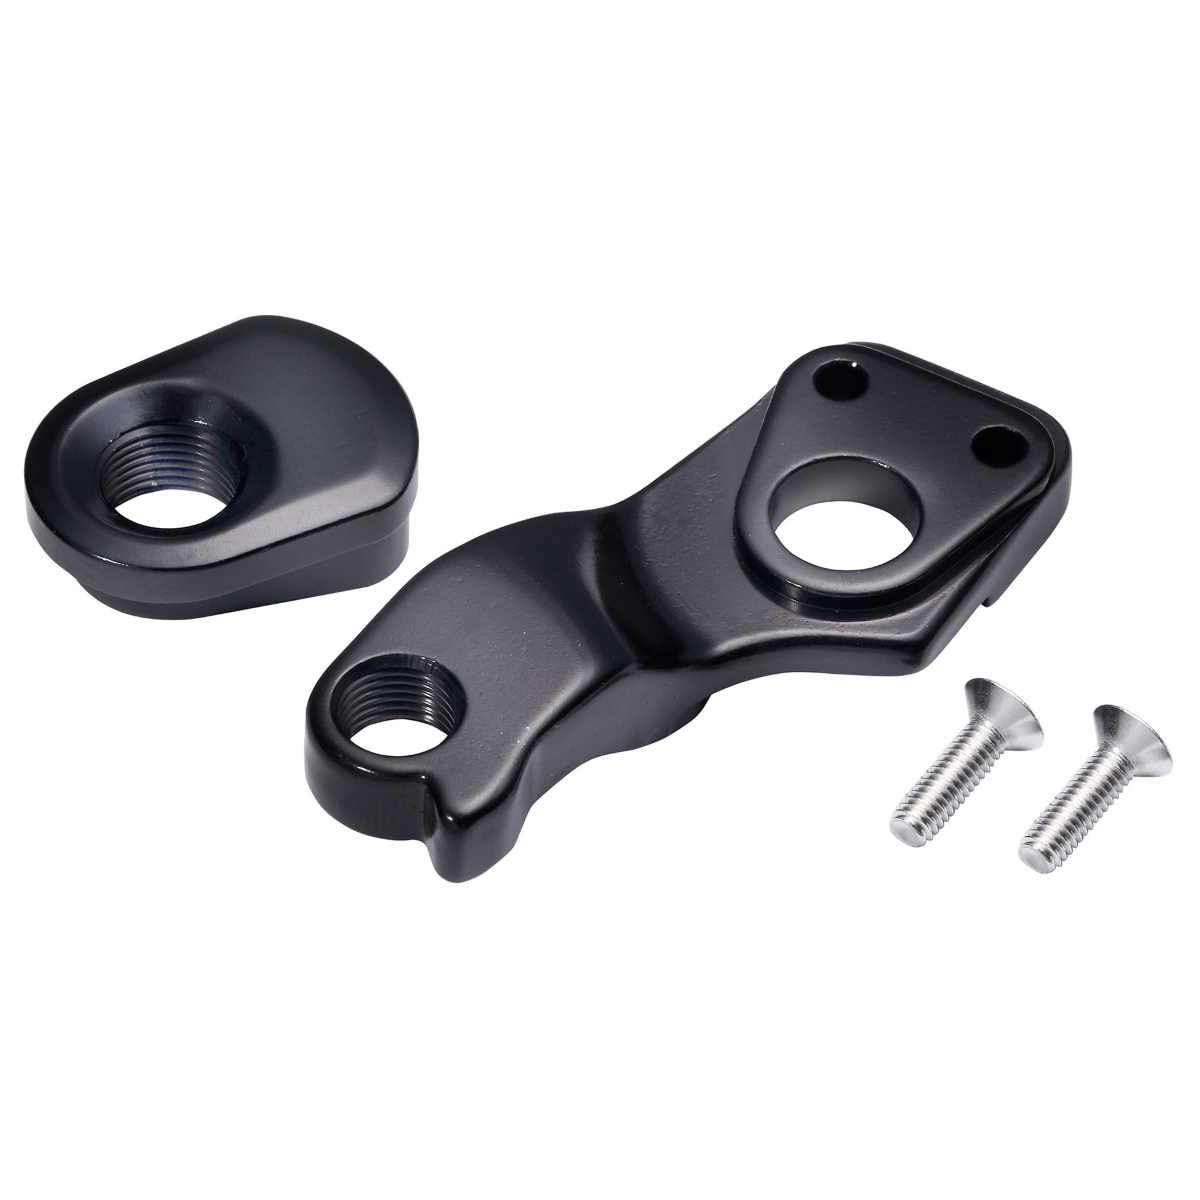 Picture of Giant Derailleur Hanger for Anthem / Trance / Pique / Hail | Shimano Direct Mount -  380000021